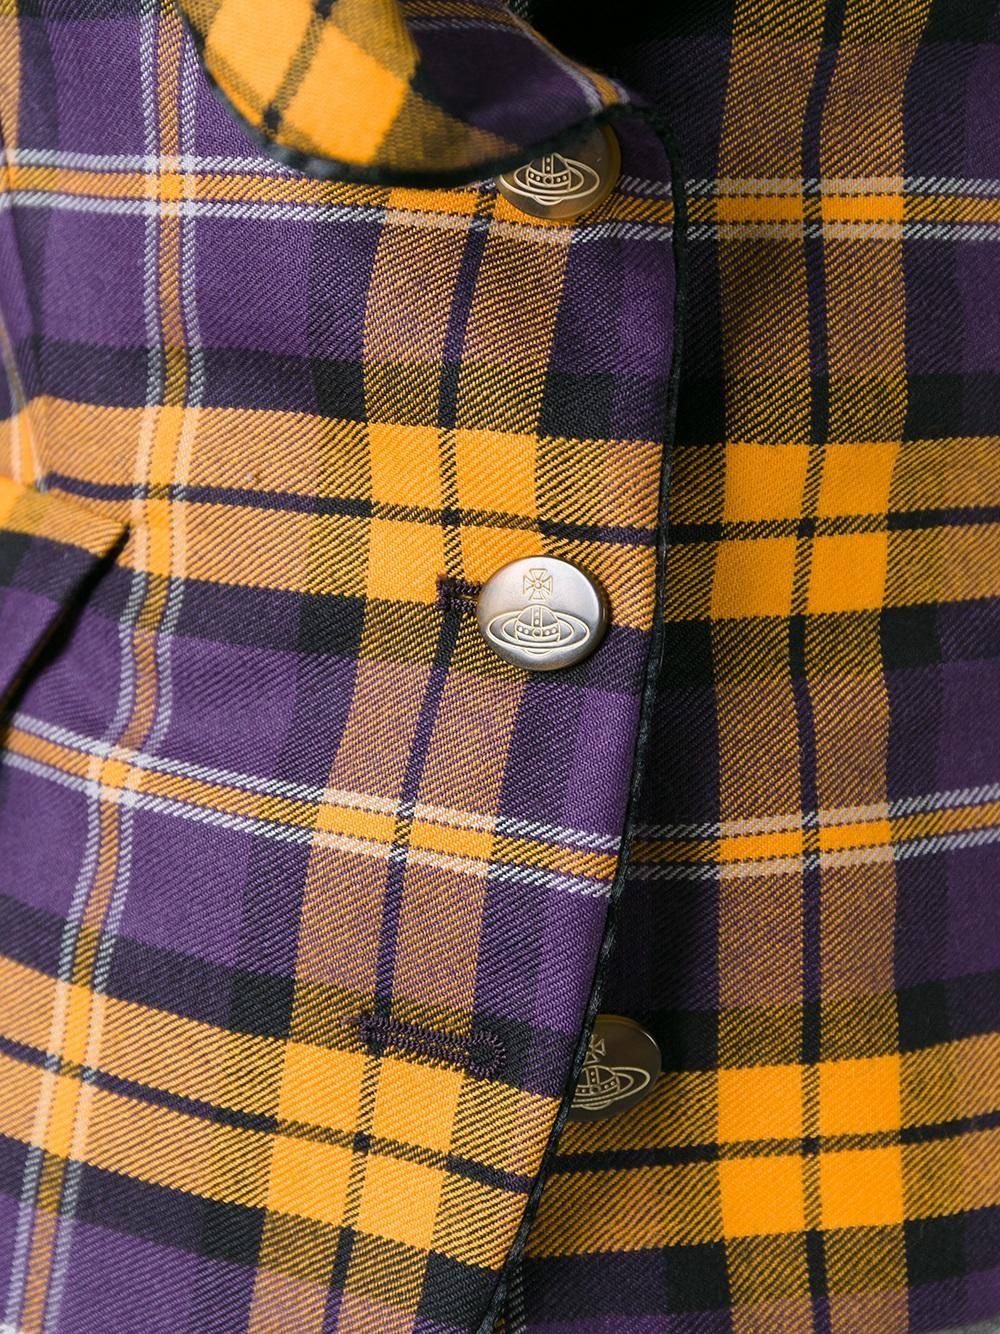 1990s Red Label Purple and yellow wool check jacket from Vivienne Westwood Vintage featuring a shawl collar, long sleeves, button cuffs, a front buckle fastening and front flap pockets.
Made in Italy.
size 42 IT.
Outer Composition
Wool 100%
Lining